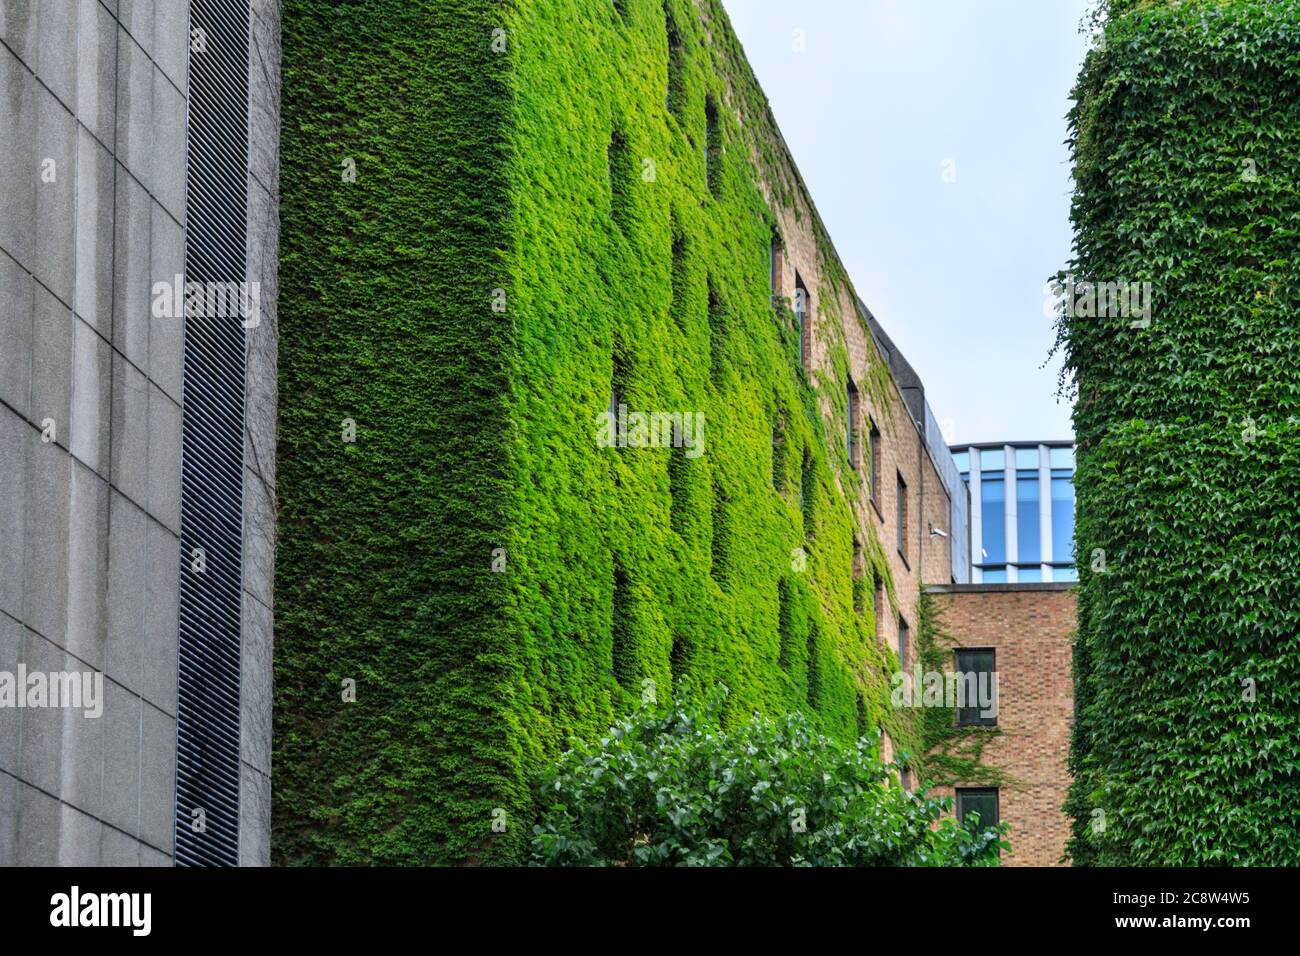 Green or Living Wall, external walls covered in Ivy and greenery on office building in London, UK Stock Photo